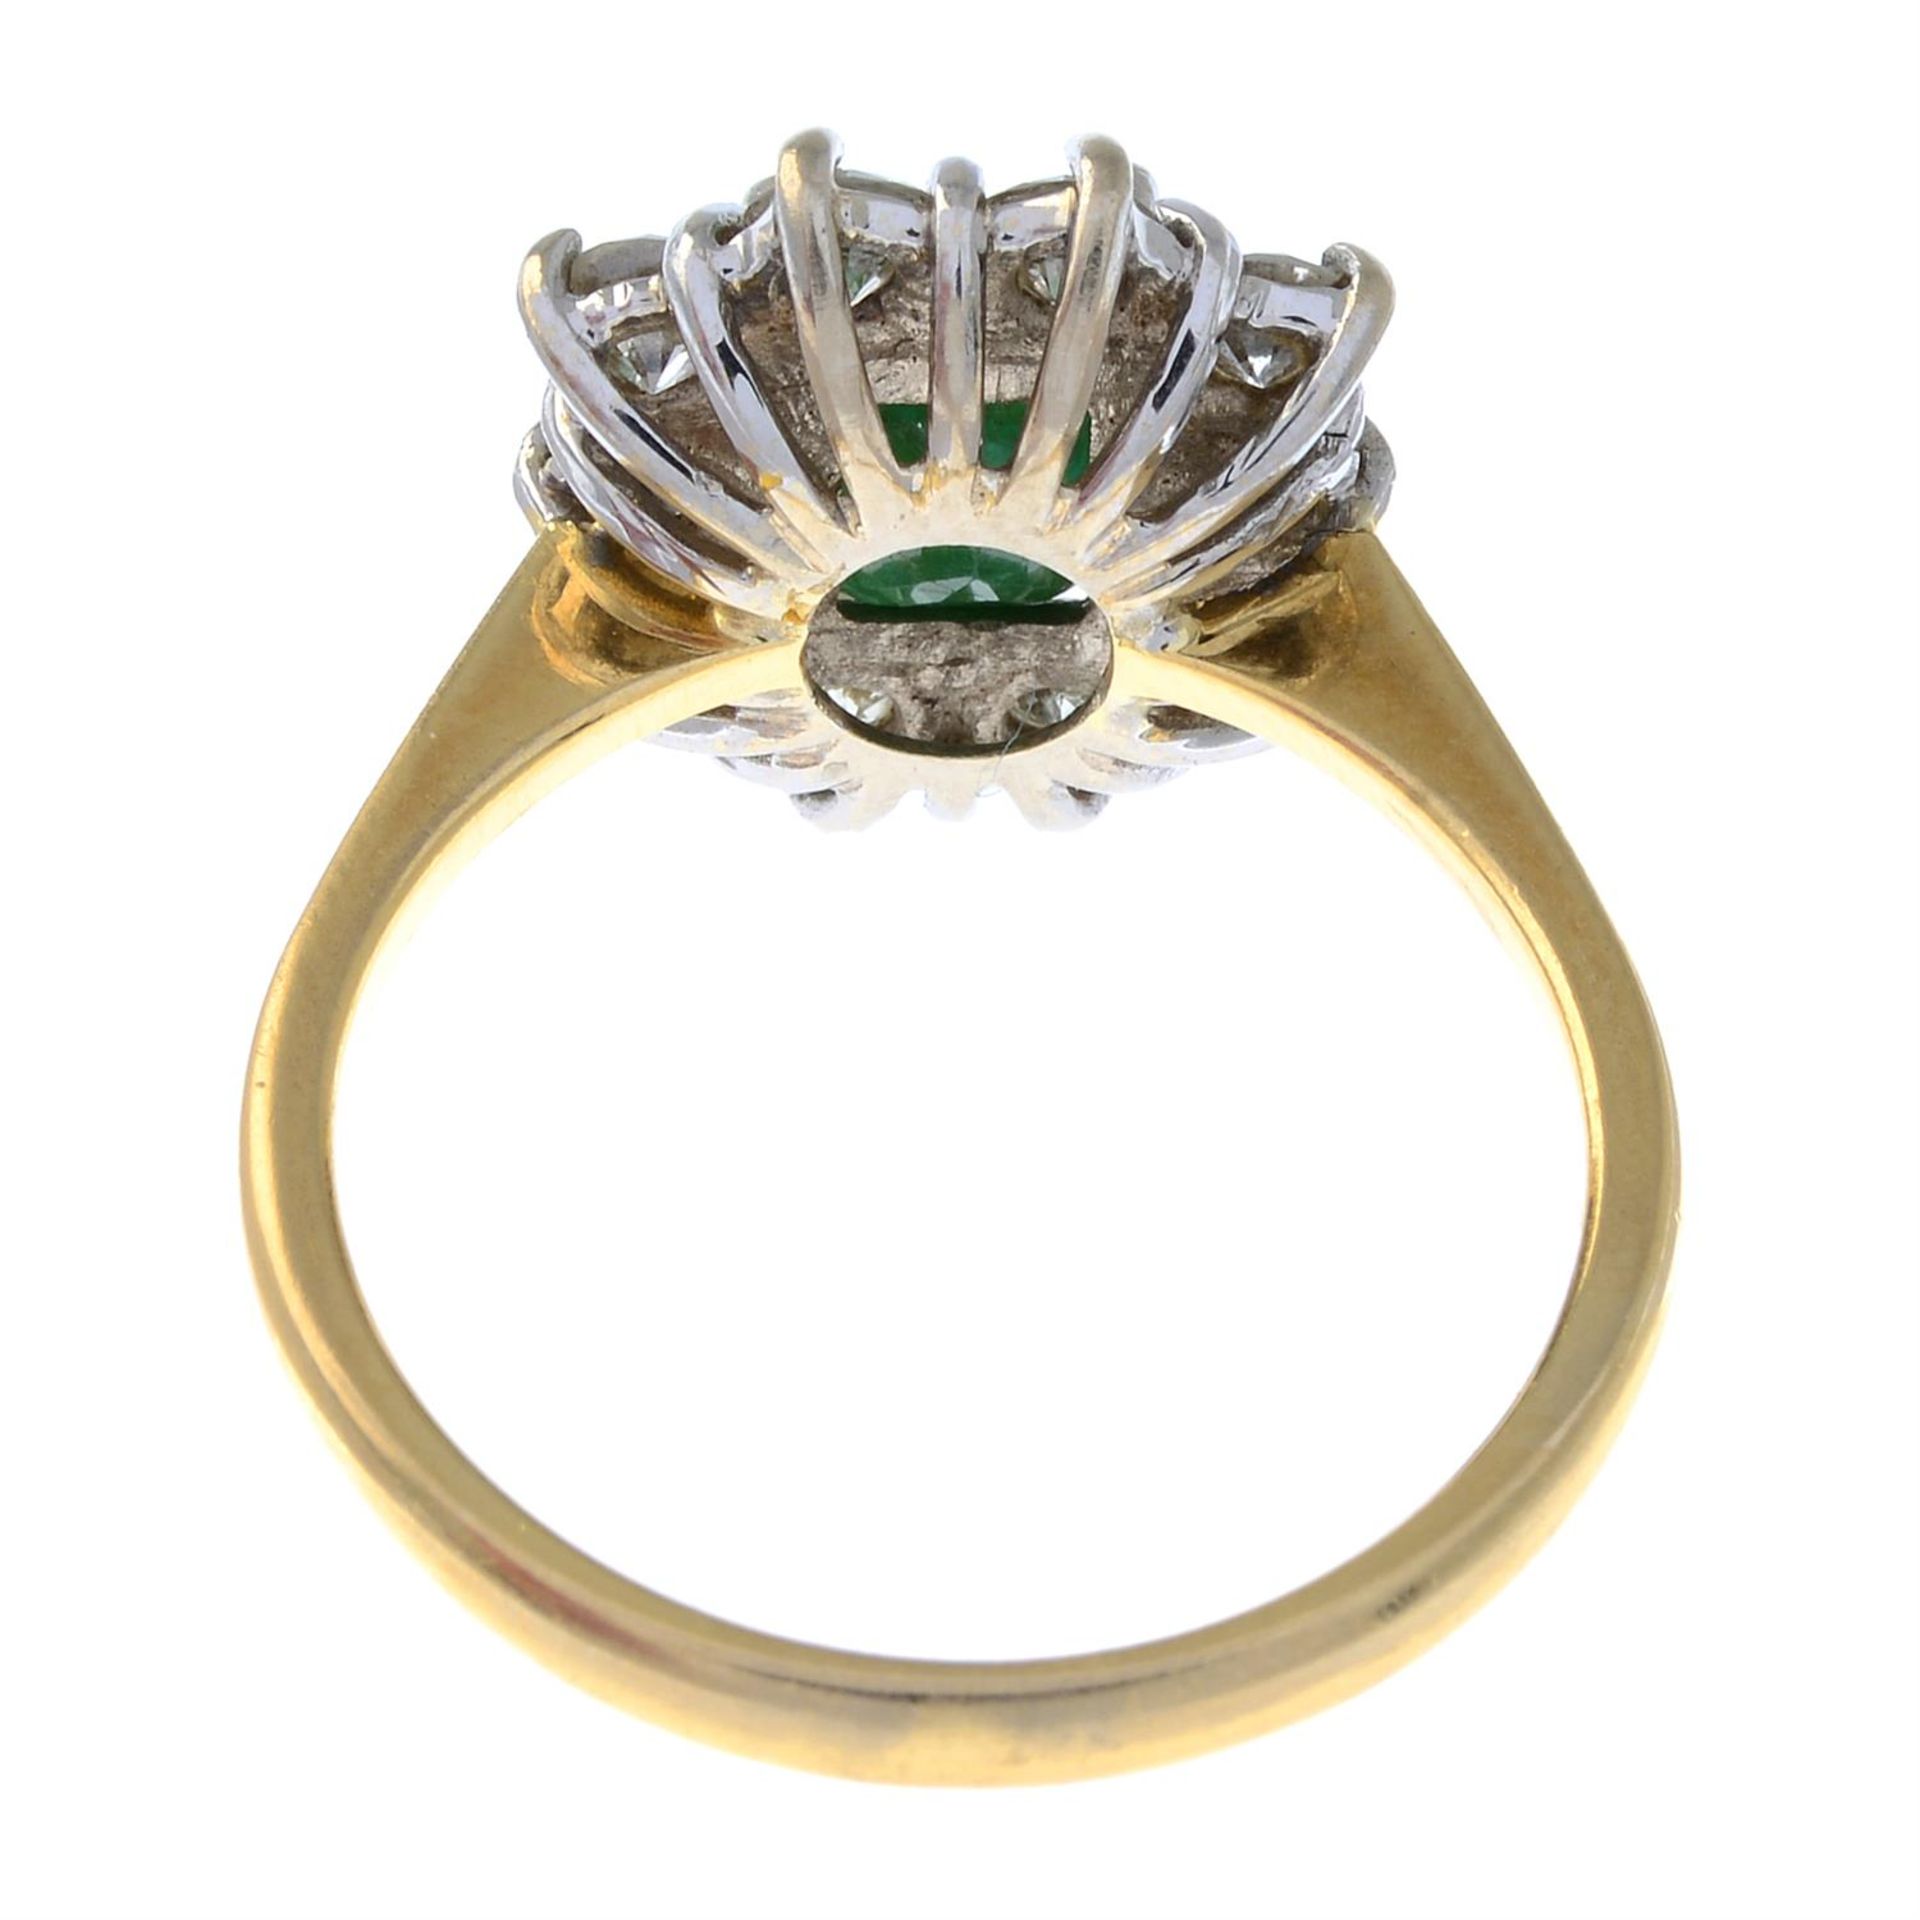 18ct gold emerald & diamond cluster ring - Image 2 of 2